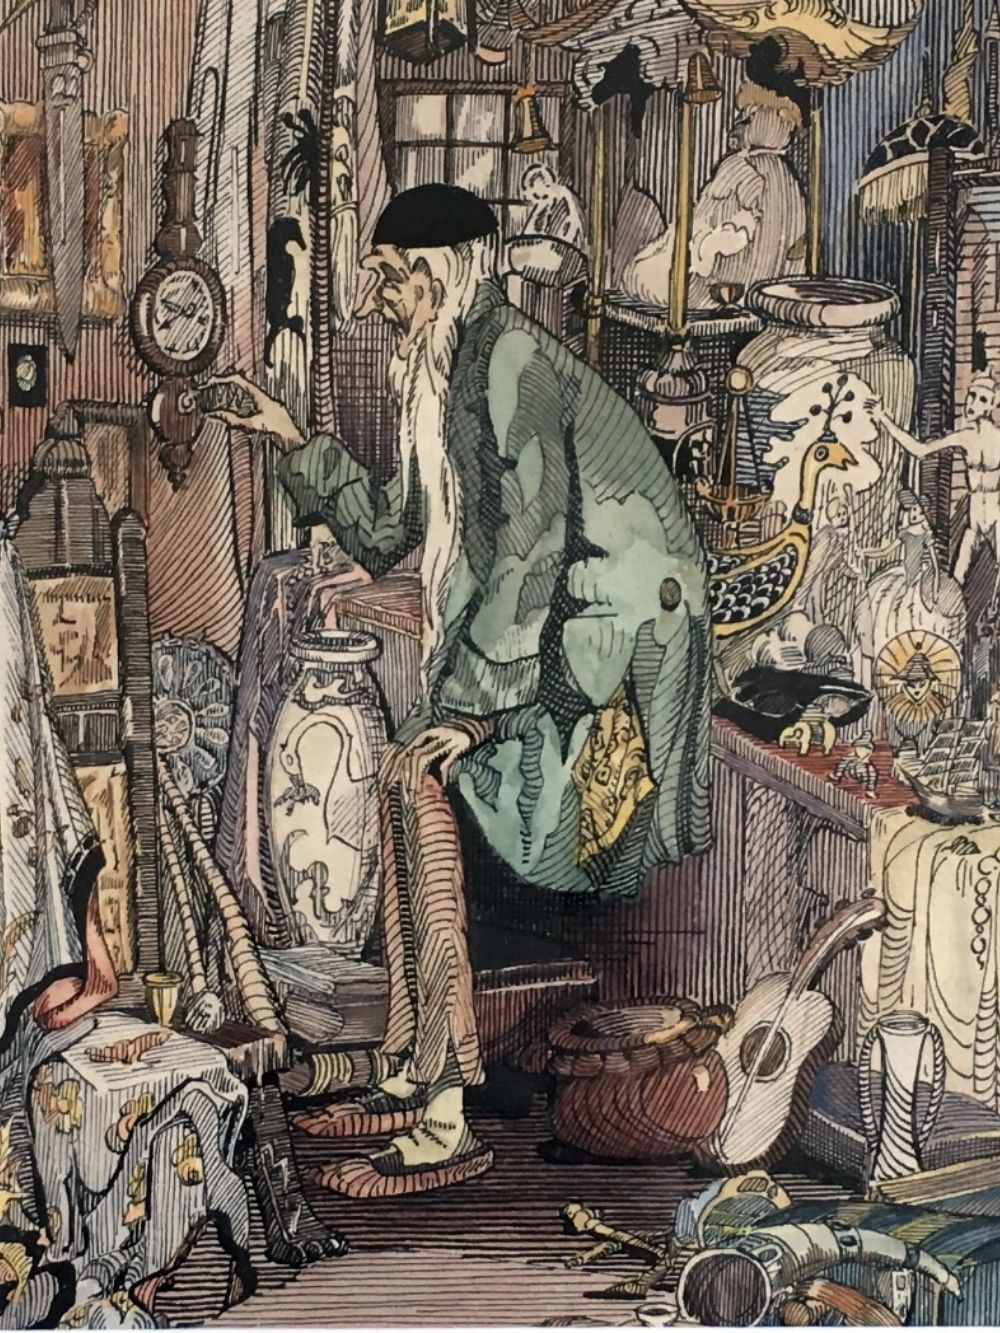 watercolour of a scene from the curiosity shop